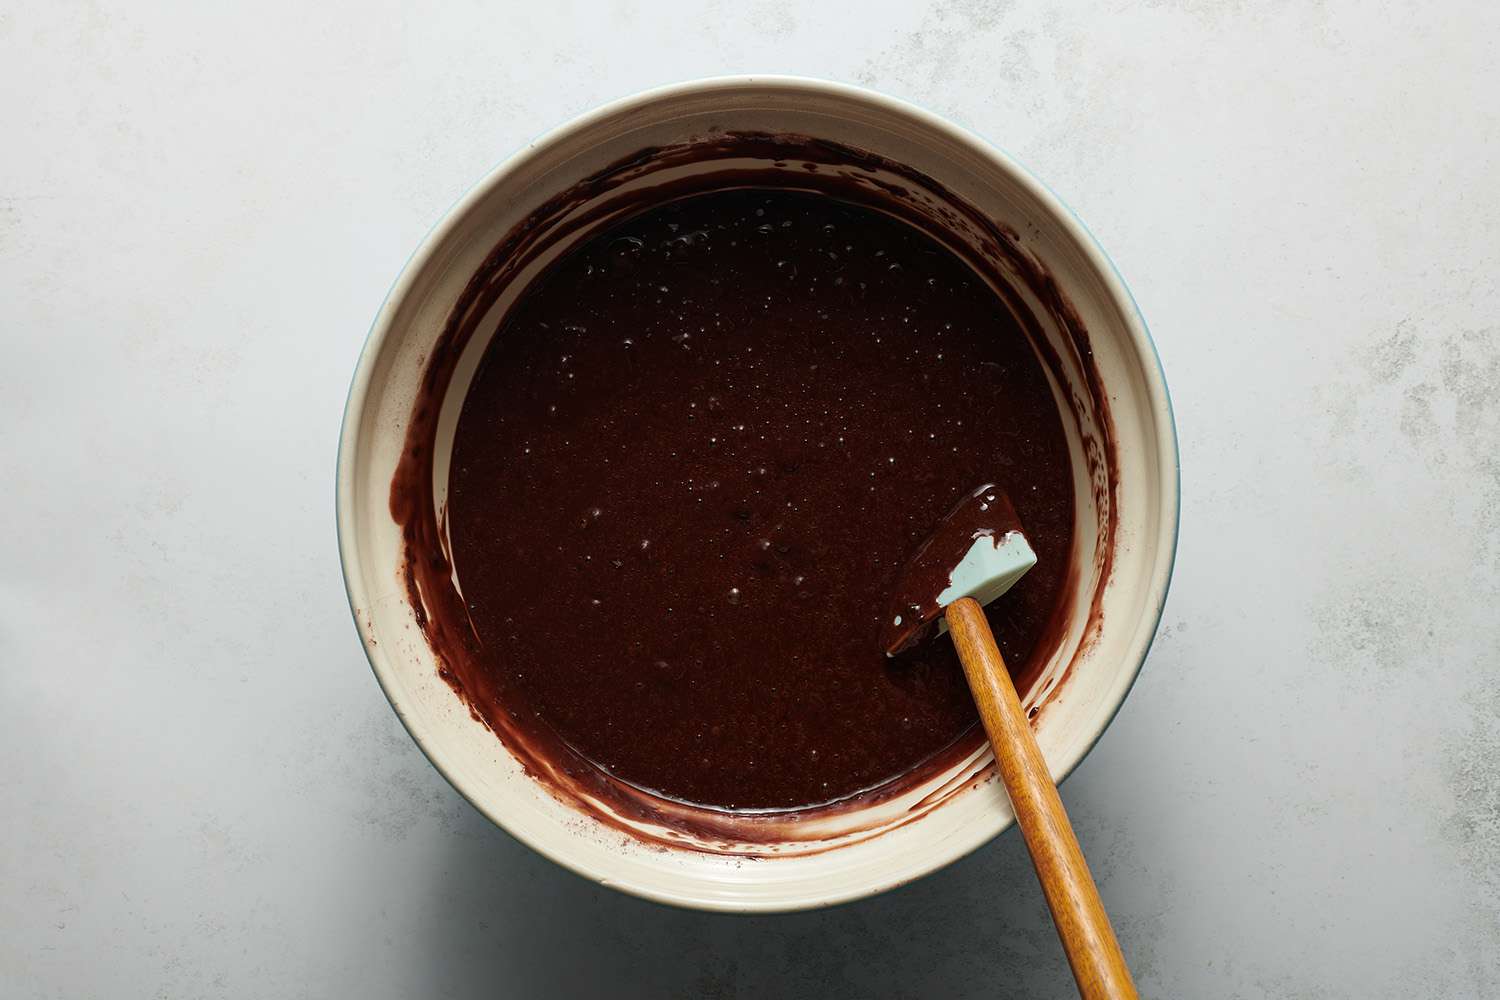 chocolate cupcake batter in a bowl